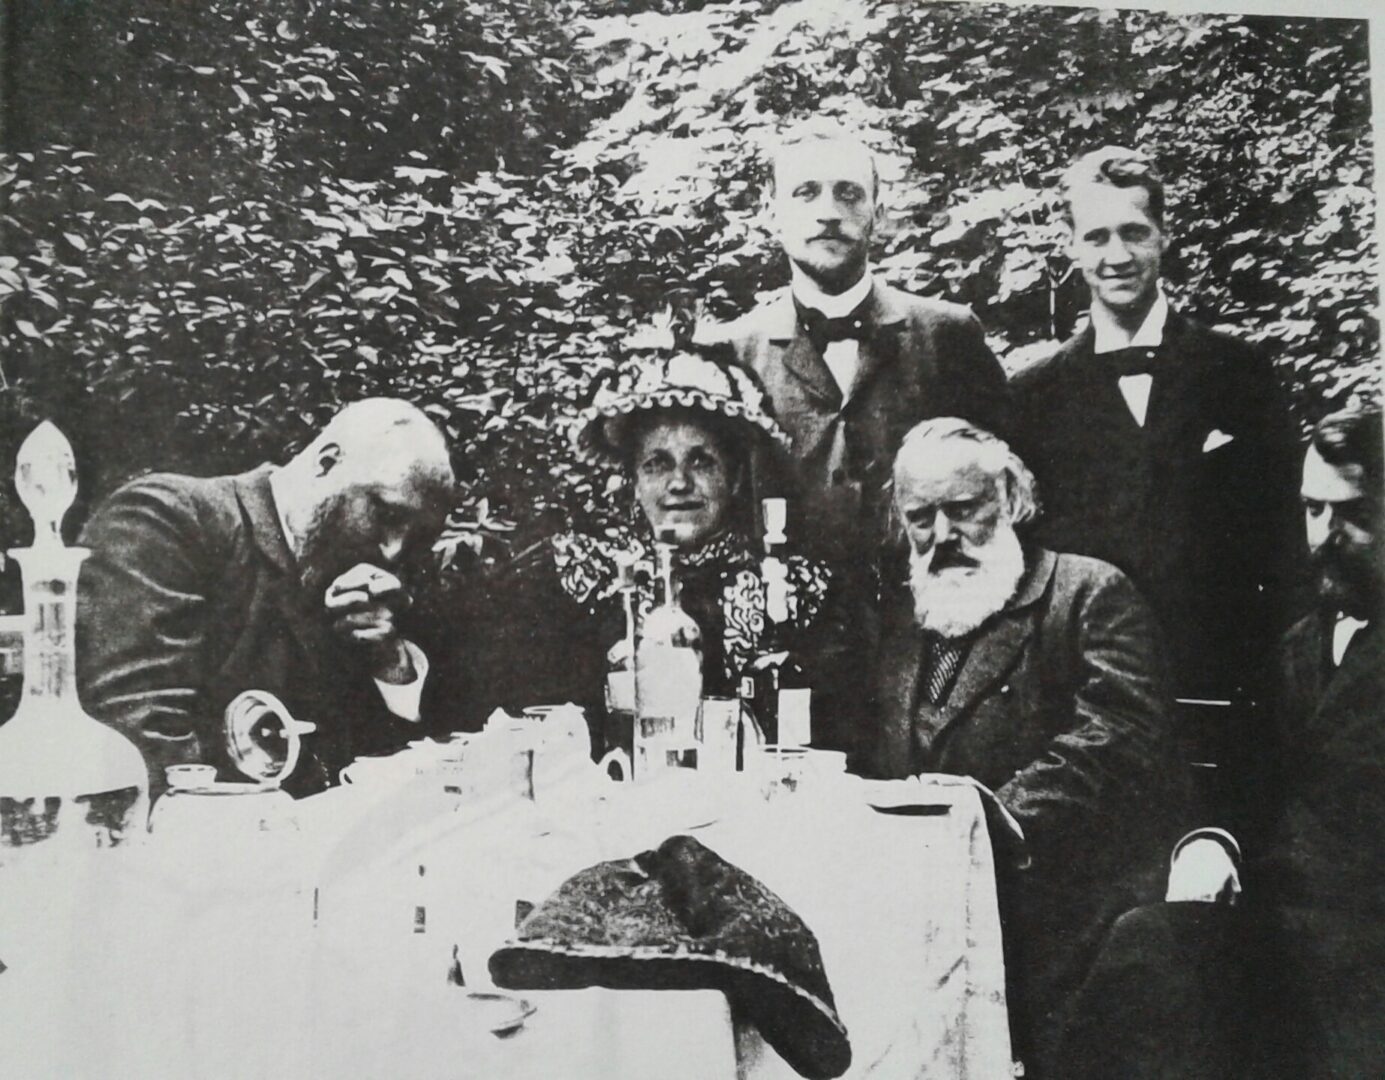 The Fellingers, Richard and Marie, with whom Brahms spent his last Christmases.